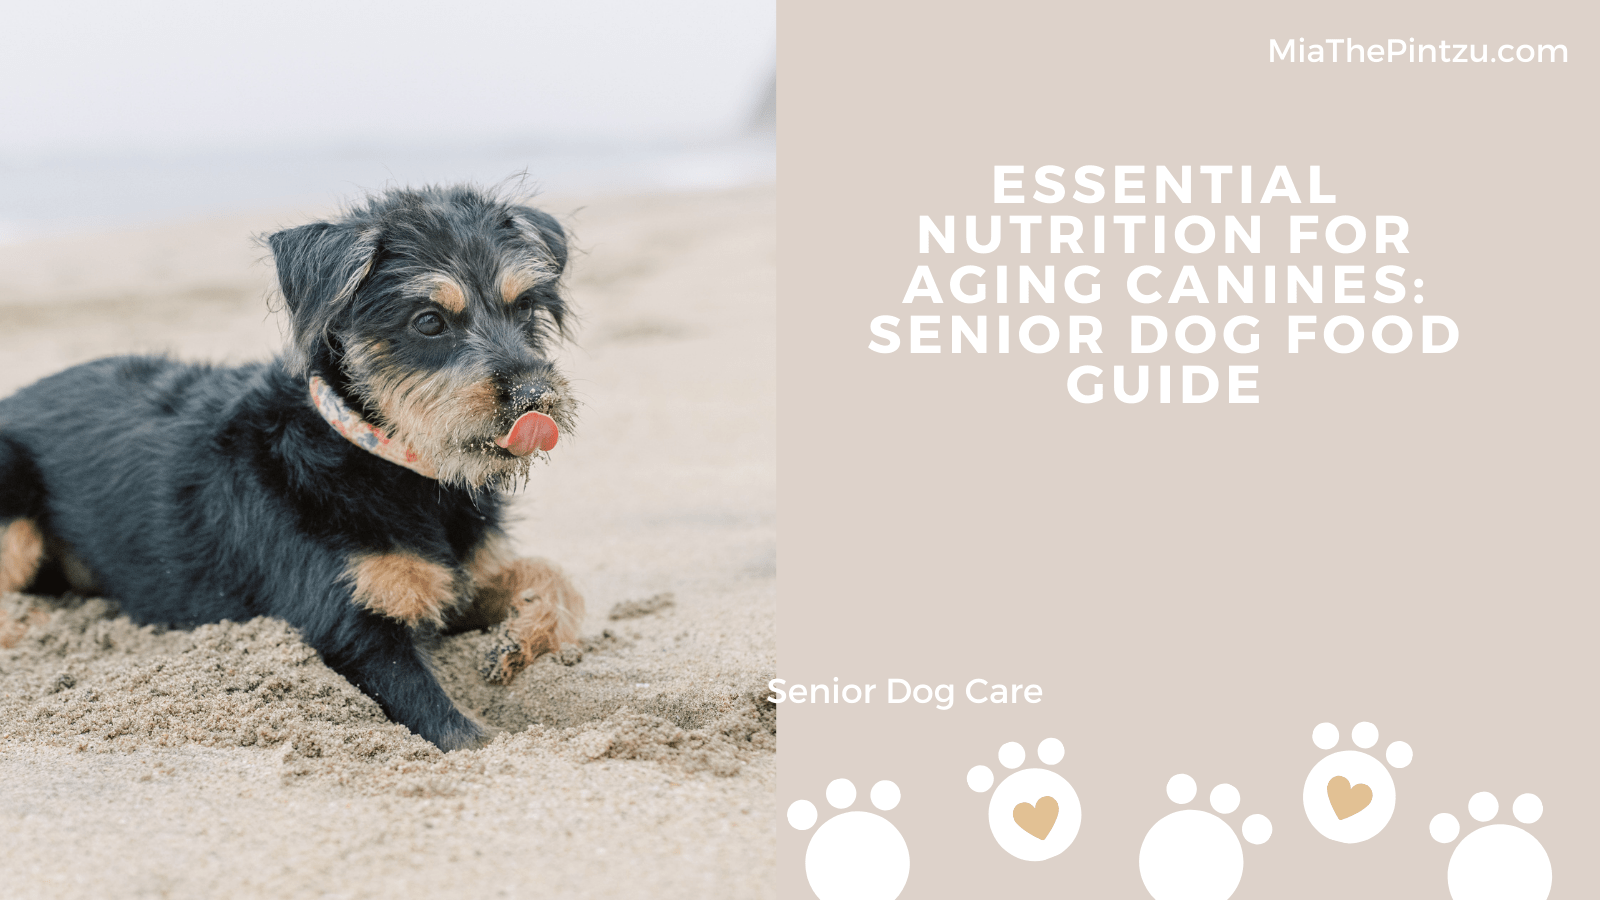 Essential Nutrition for Aging Canines: Senior Dog Food Guide